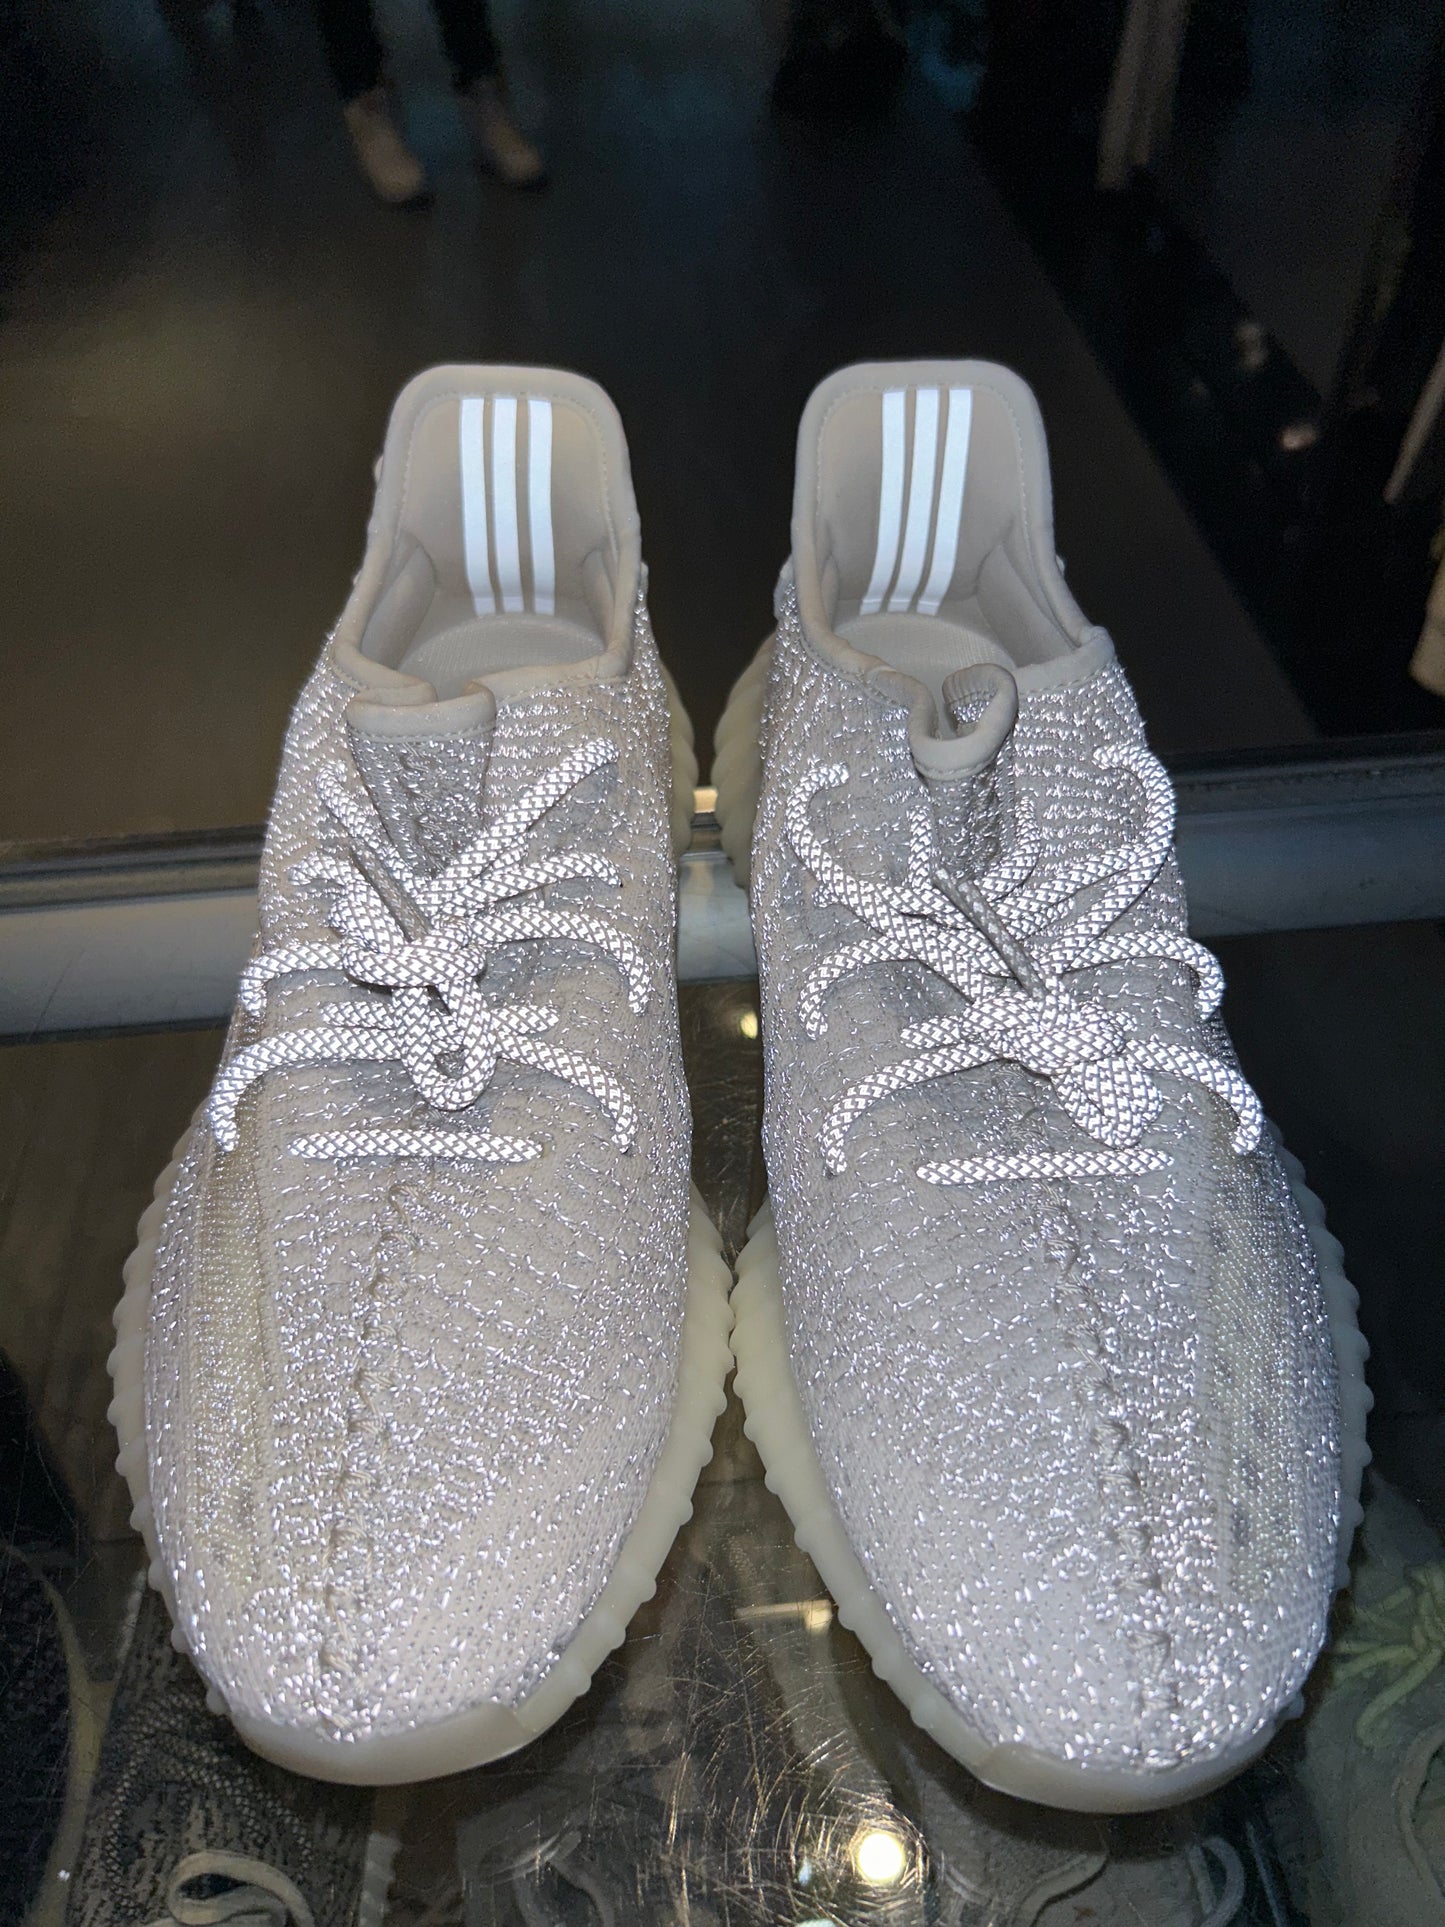 Size 10.5 Adidas Yeezy Boost 350 V2 “Static Reflective” Brand New (Mall)